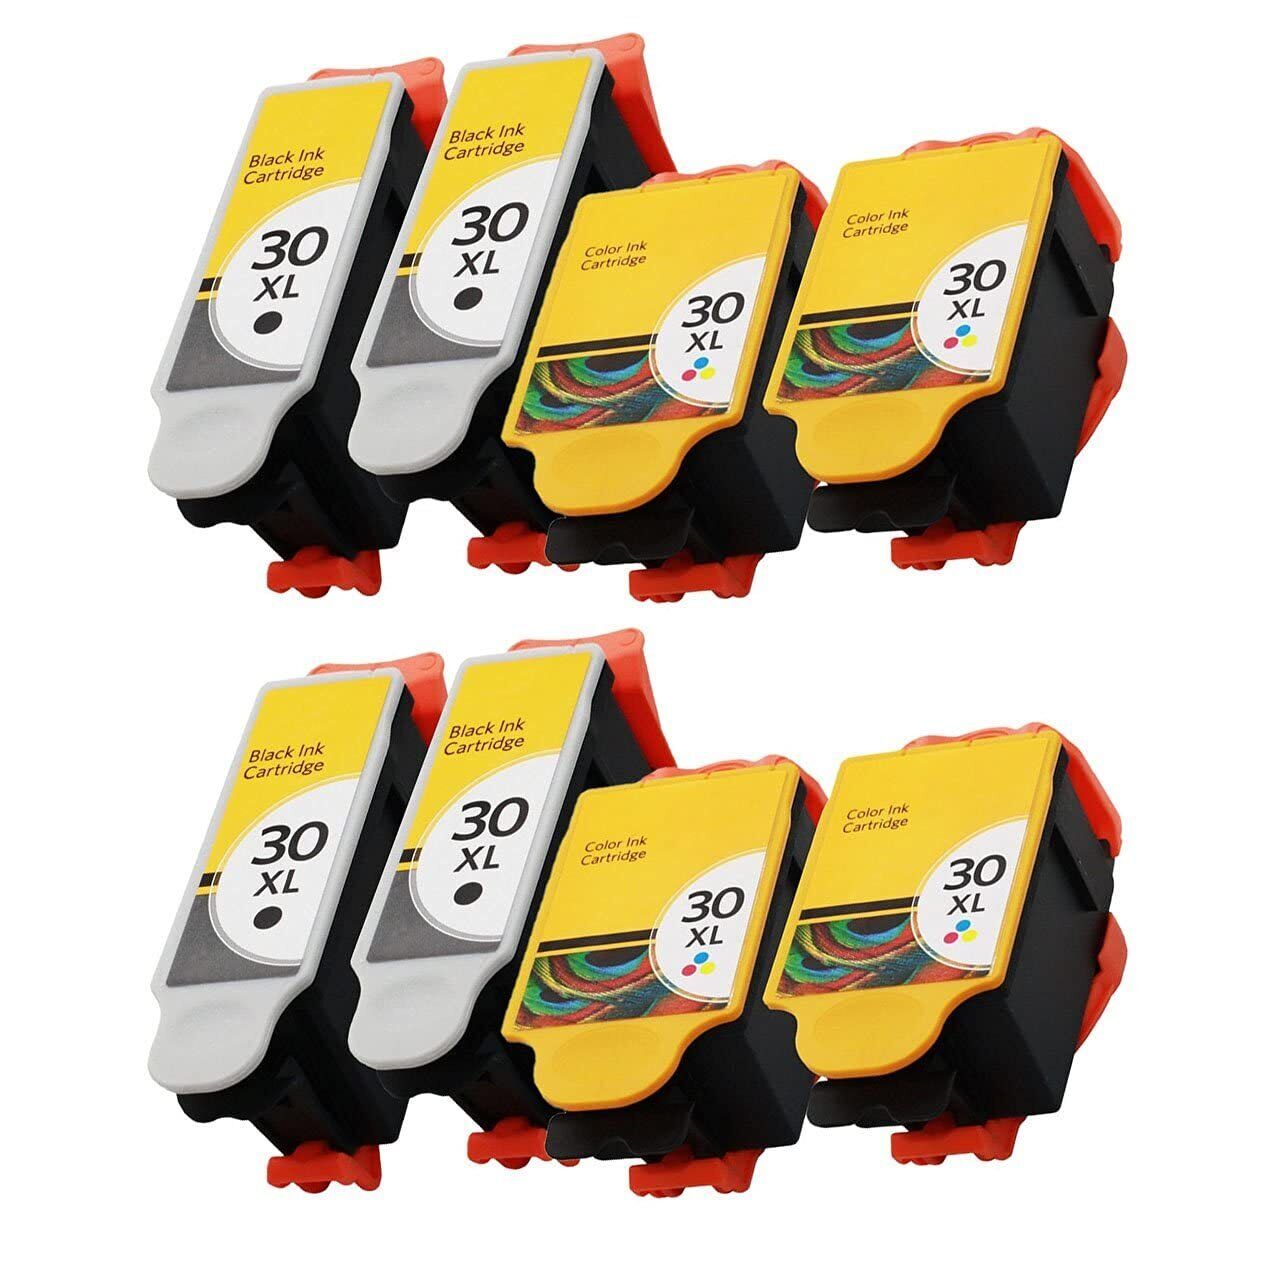 8 Pack Replacement Ink Cartridge for Kodak 30 XL Compatible with Multiple Models